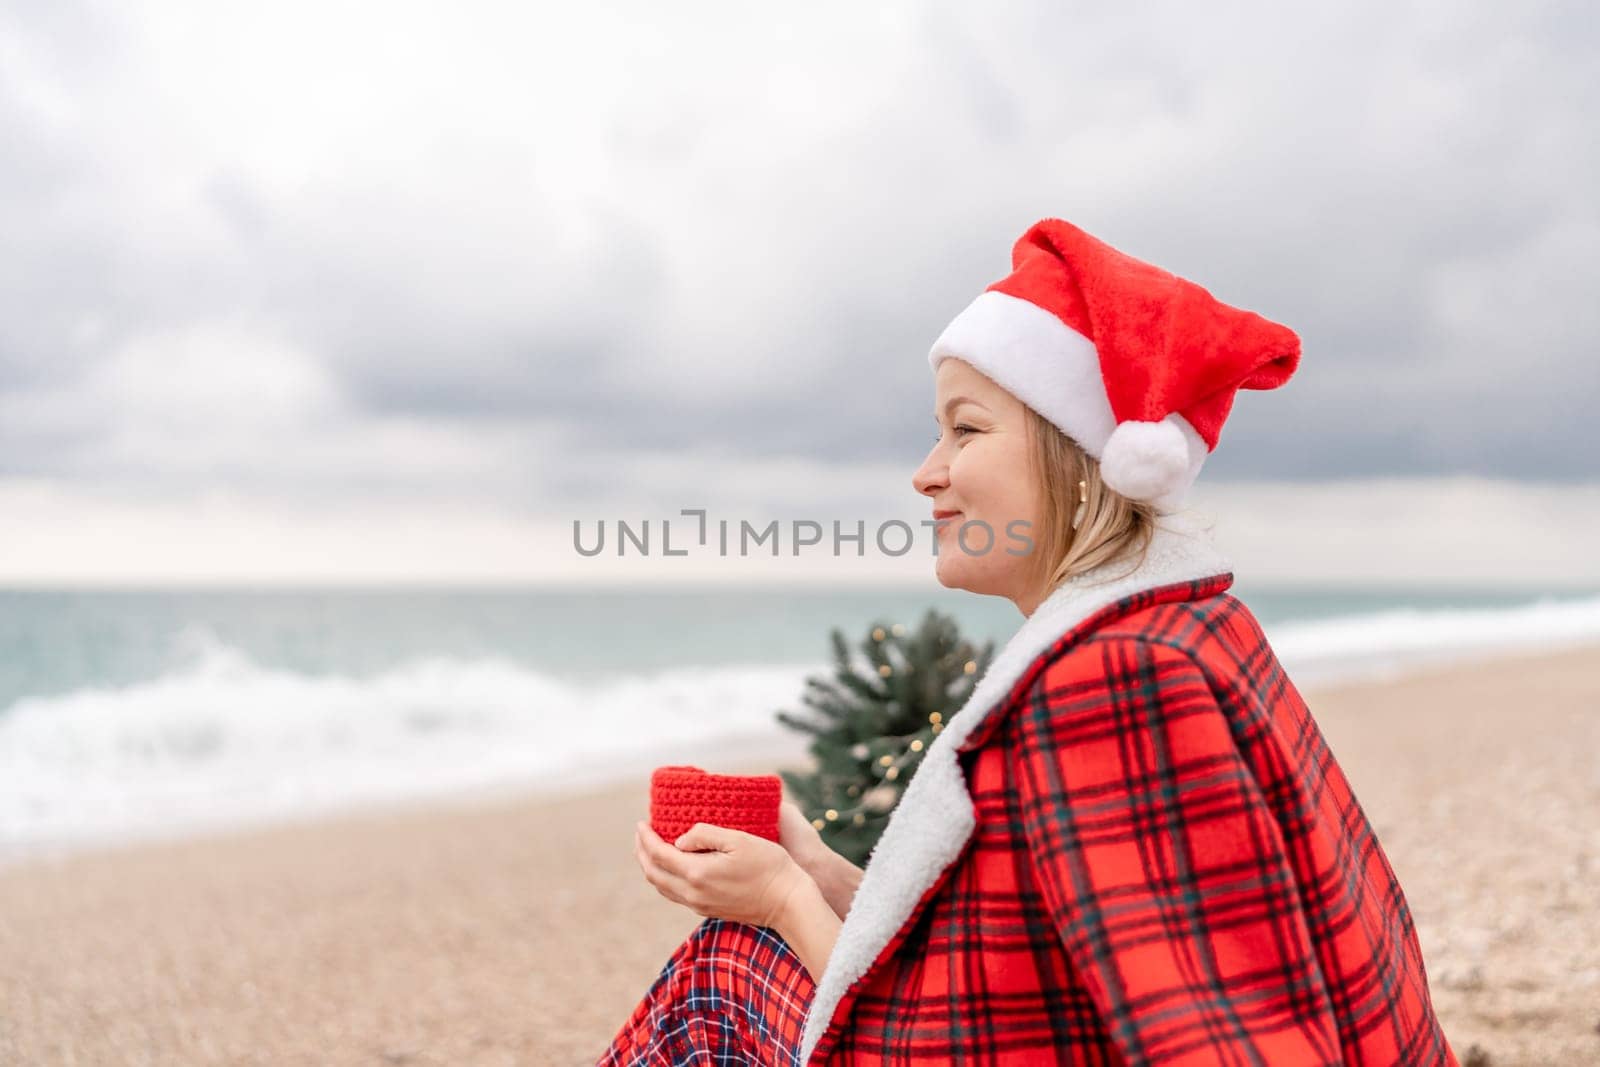 Sea Lady in Santa hat plaid shirt with a red mug in her hands enjoys beach with Christmas tree. Coastal area. Christmas, New Year holidays concep.